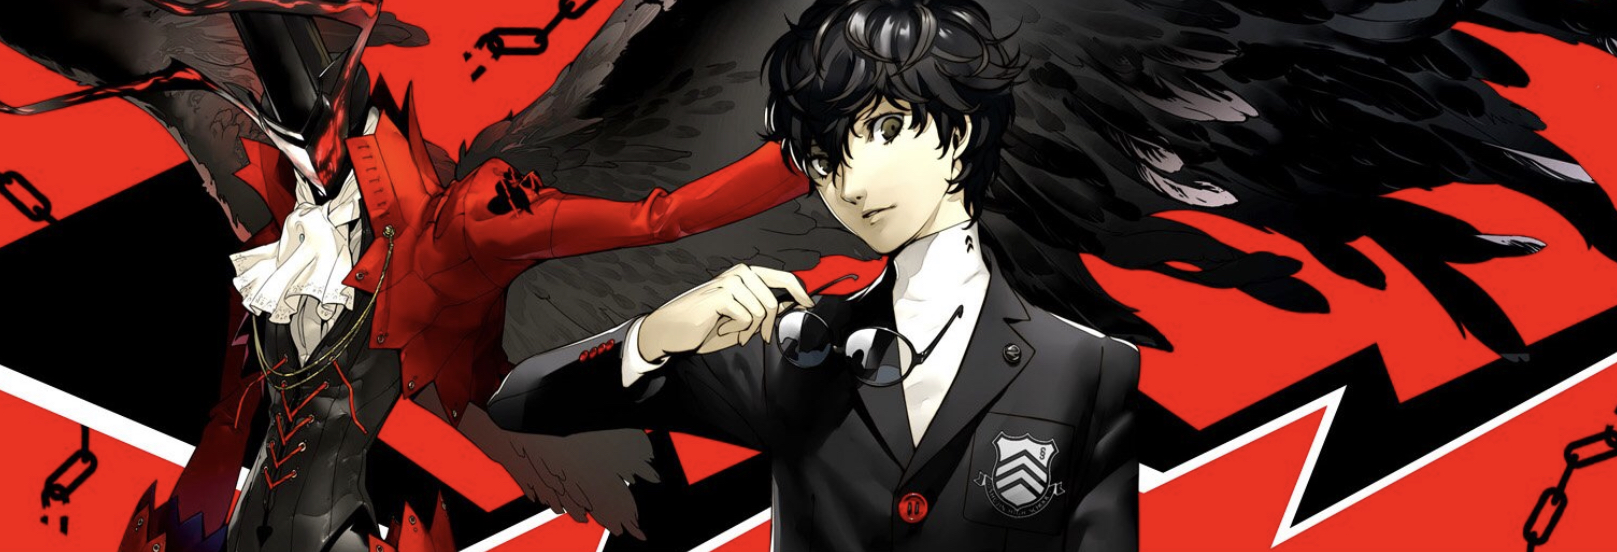 Persona 5 Picture - Image Abyss